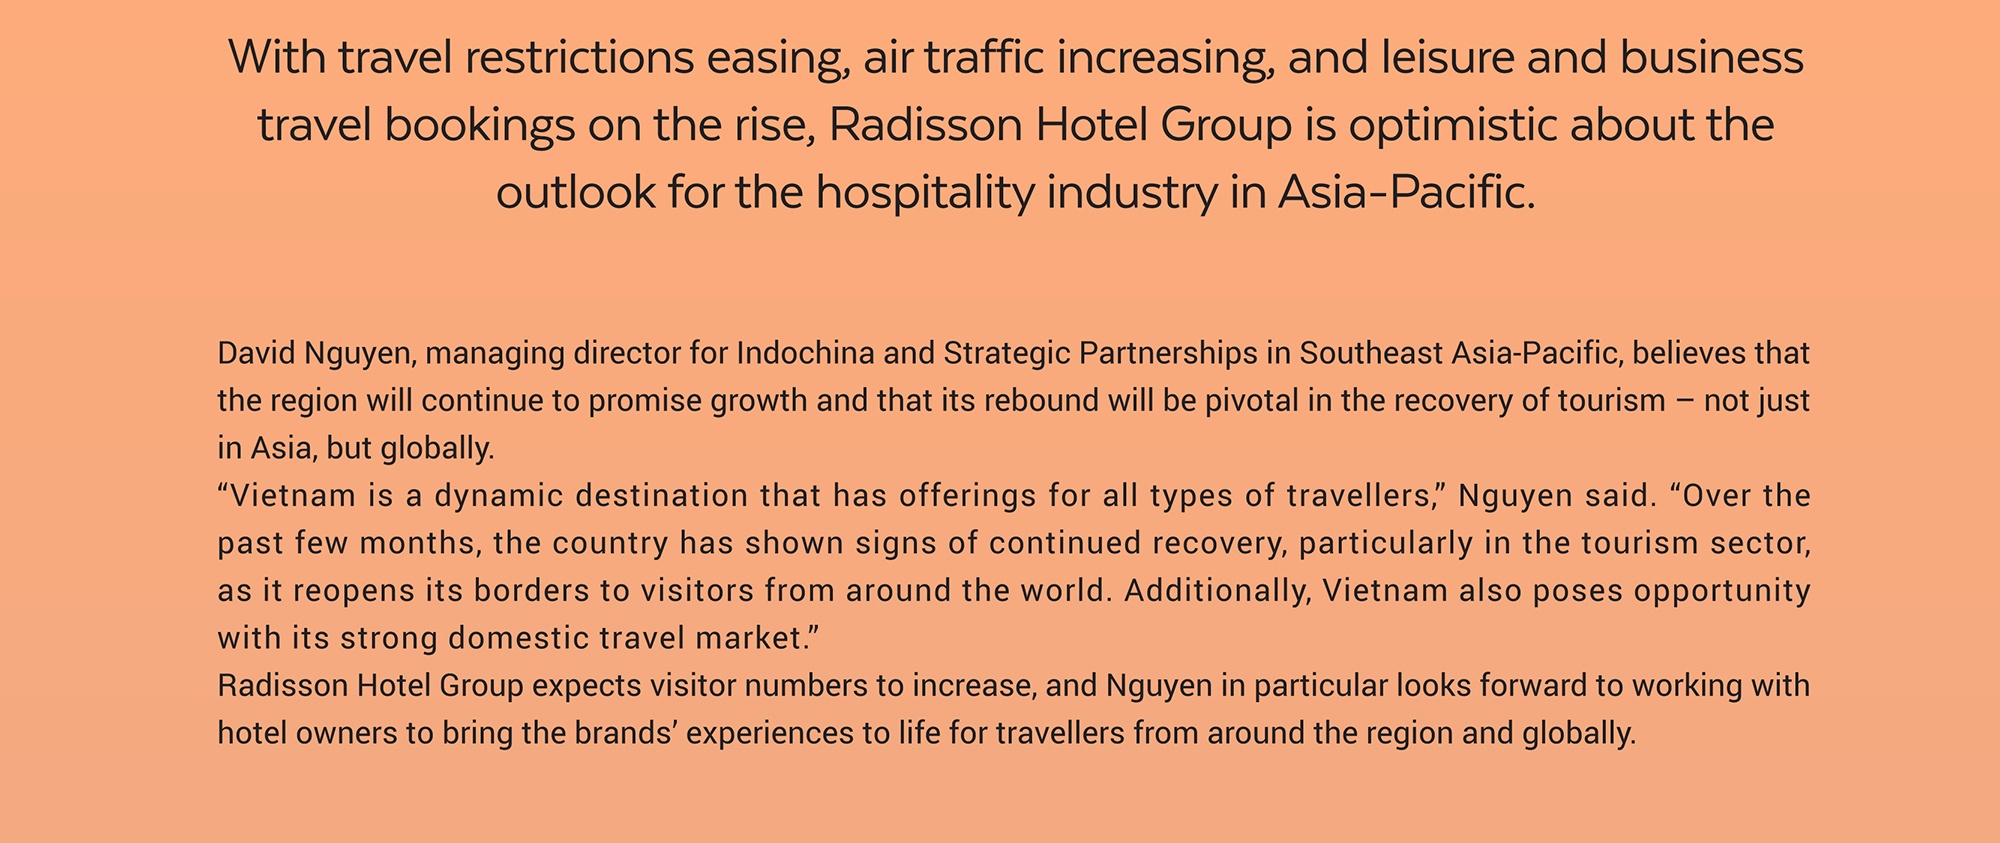 Radisson Hotel Group spearheading hospitality growth in Asia-Pacific